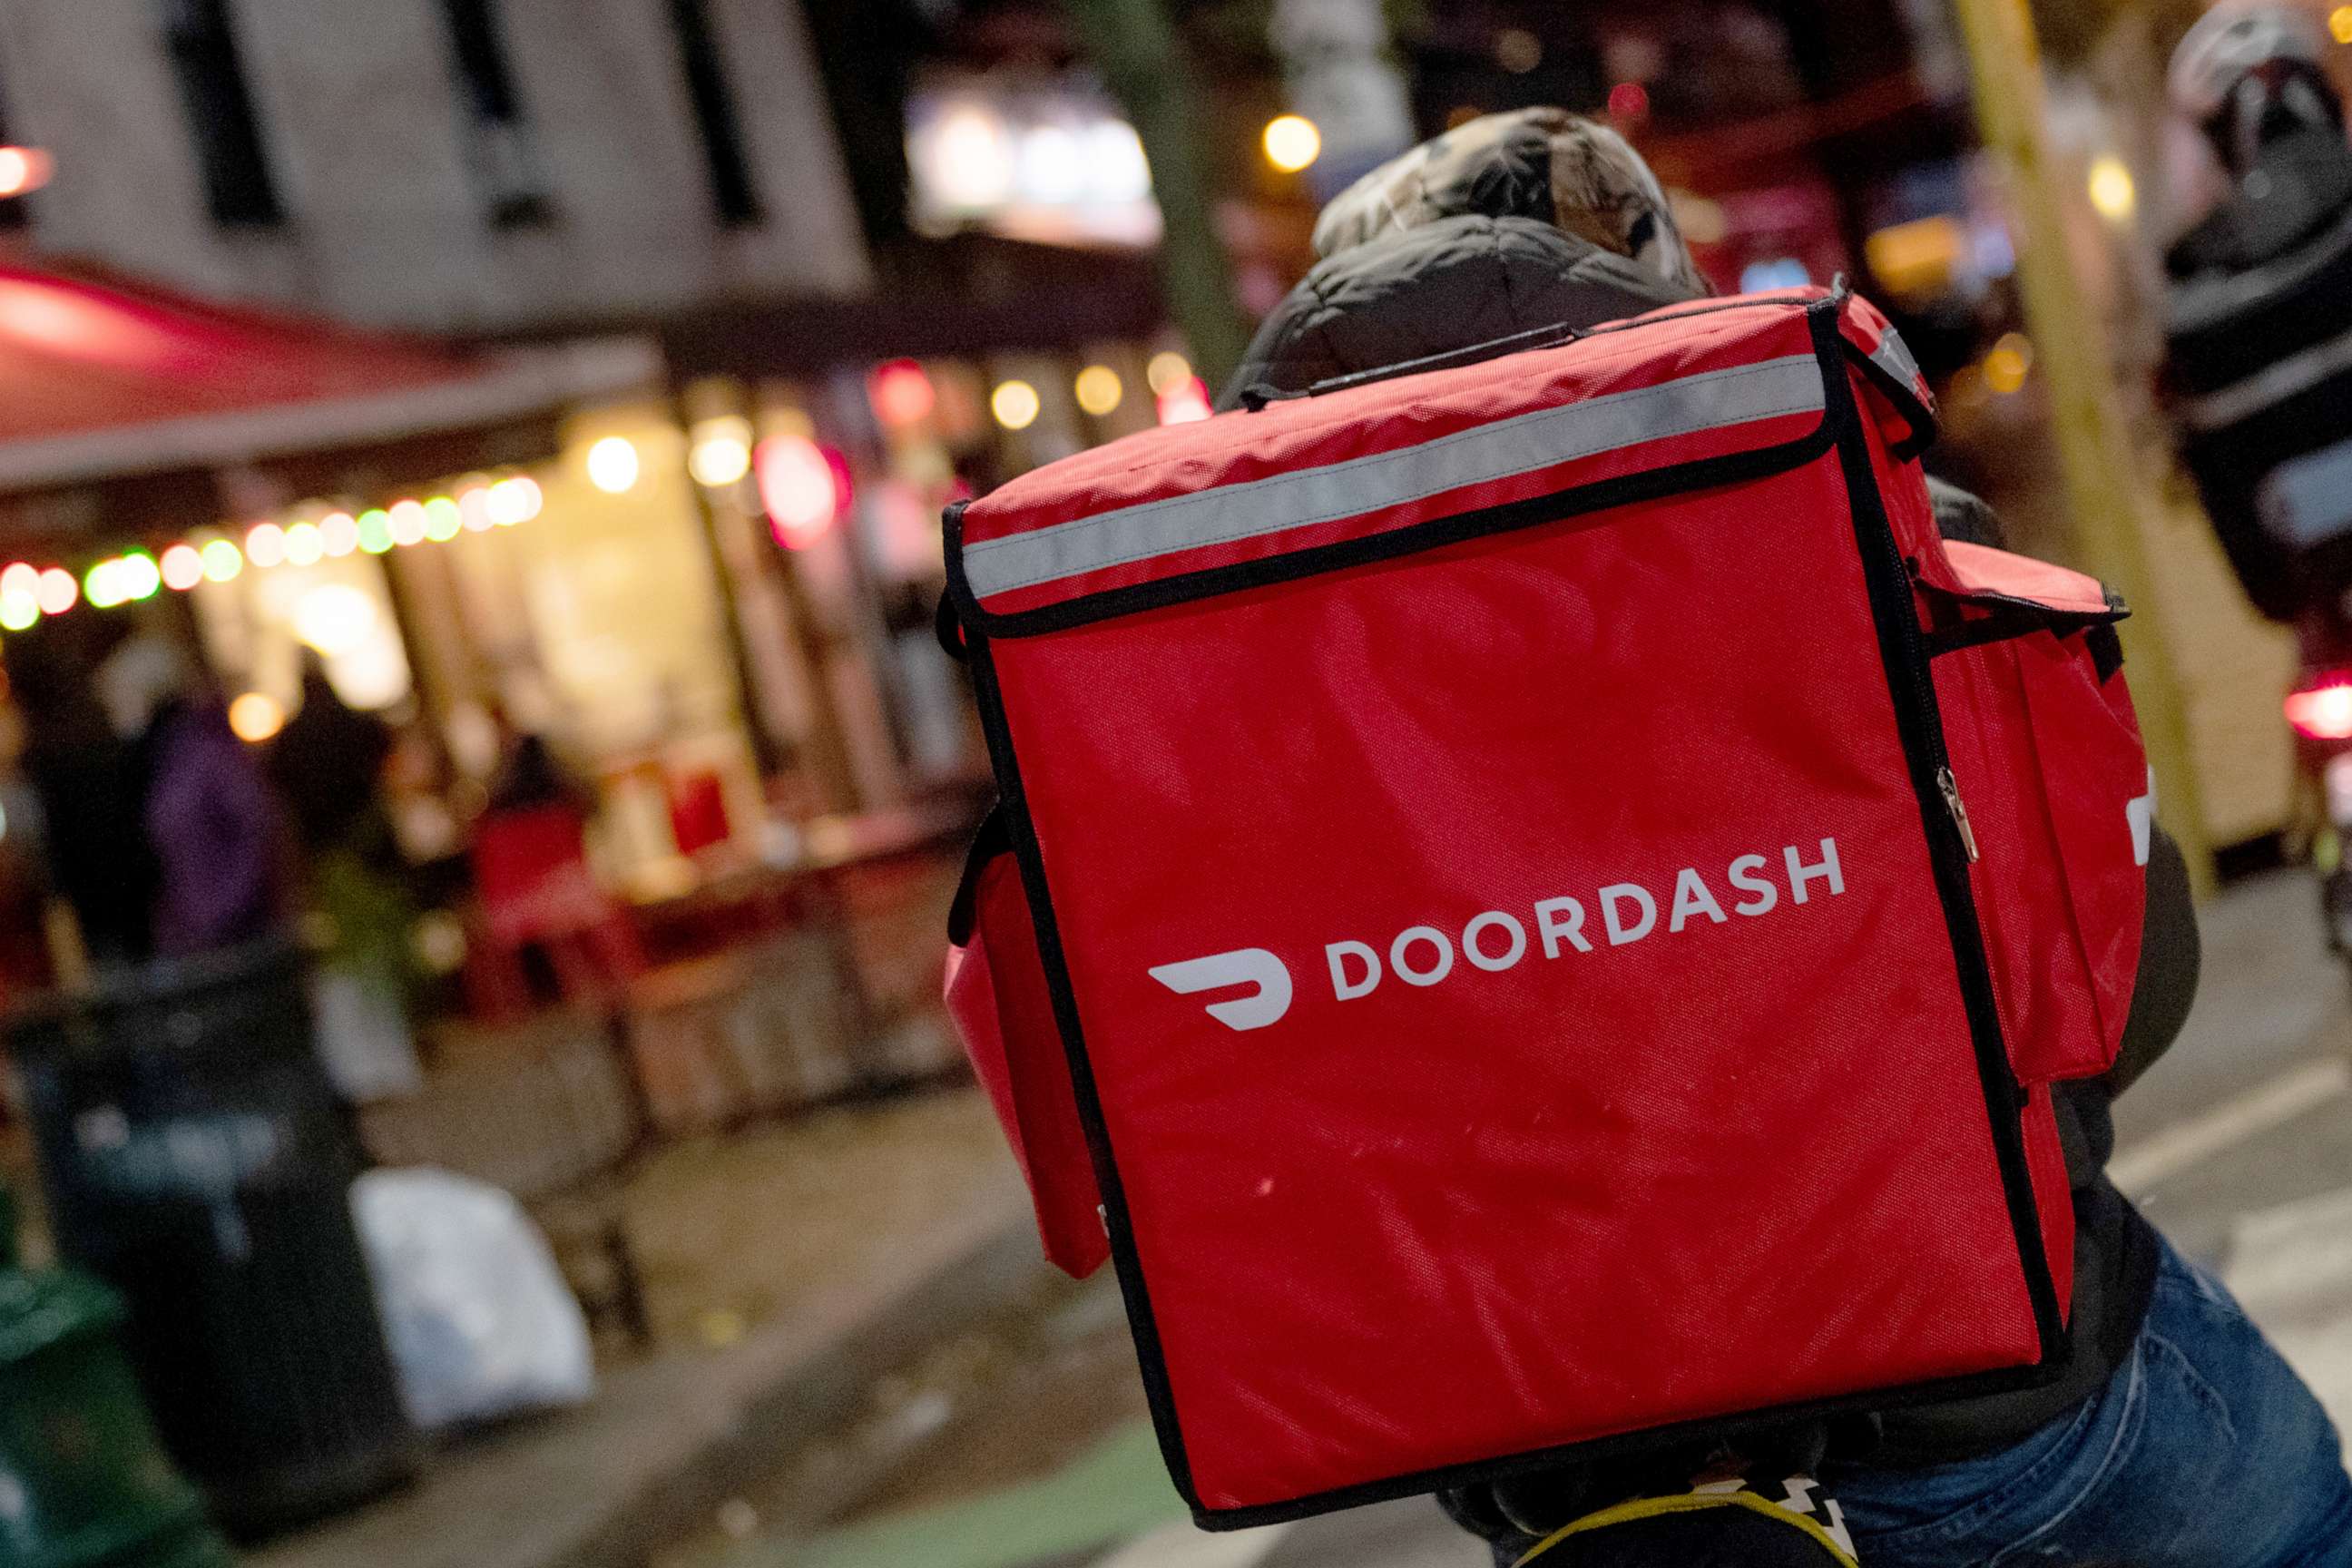 PHOTO: A doordash delivery driver waits near a restaurant on Dec. 30, 2020 in New York City.